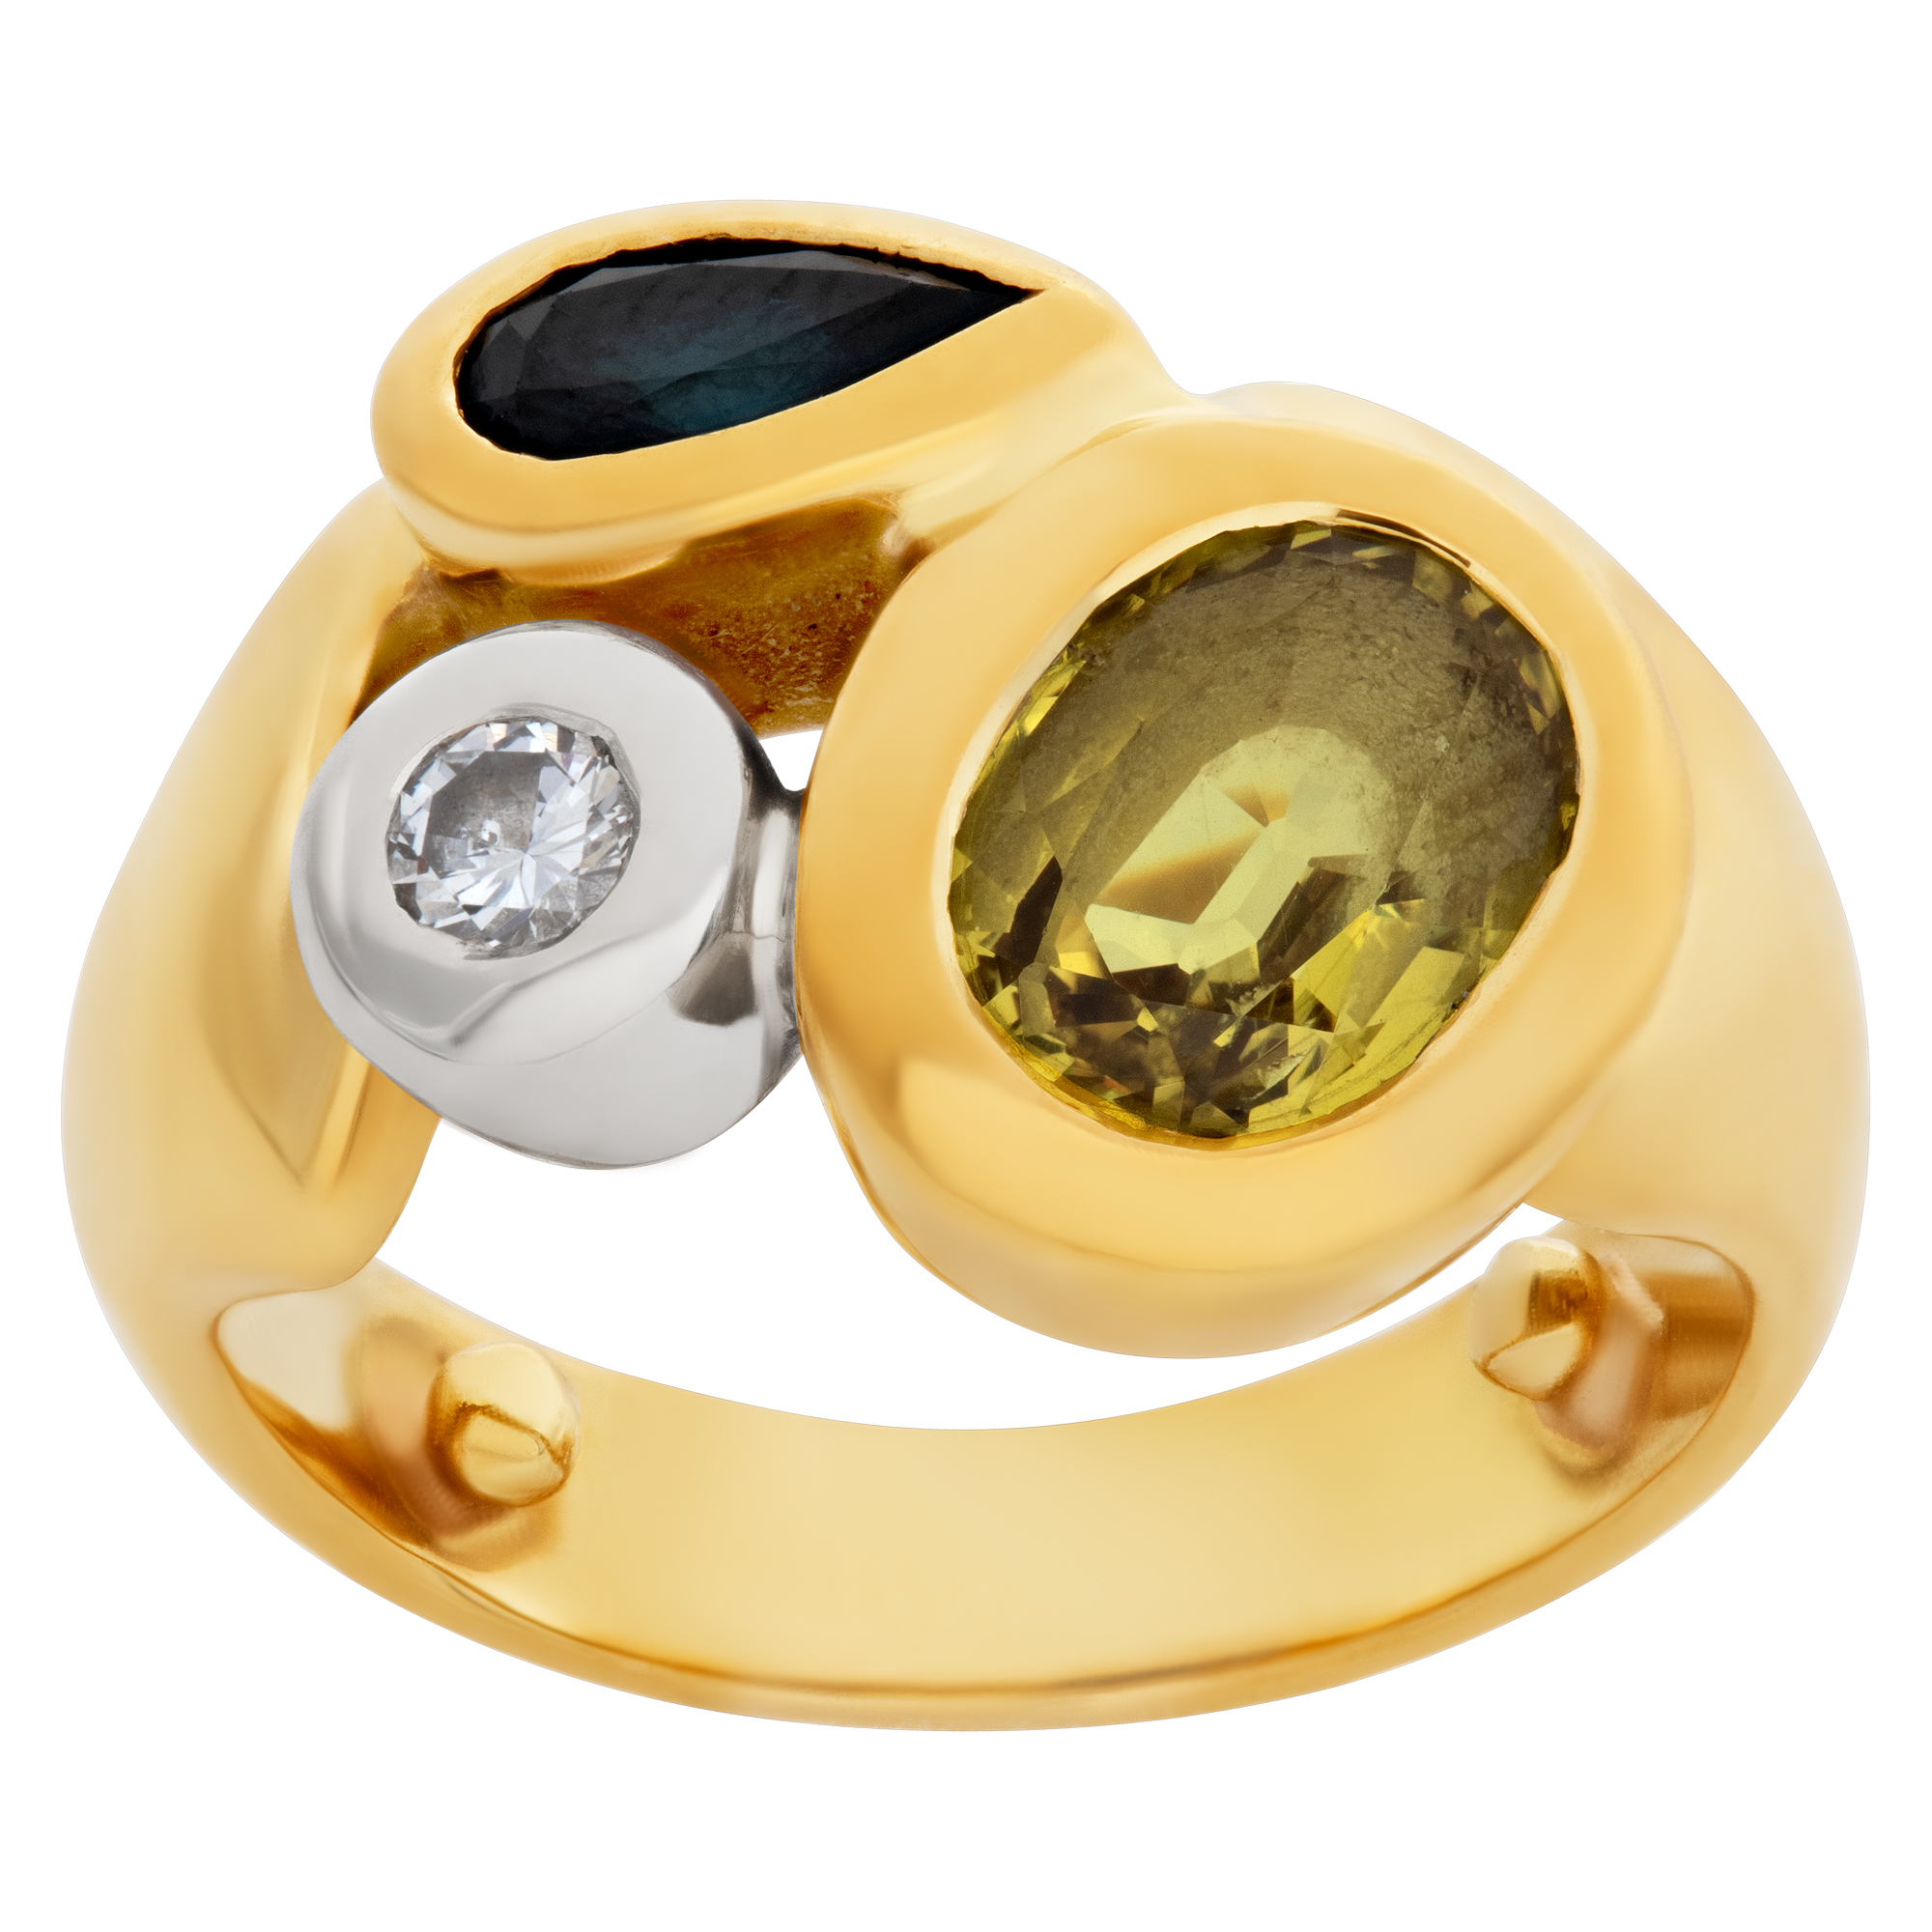 Pinky Ring In 18k With Diamond, Yellow Topaz, And Deep Blue Topaz image 1